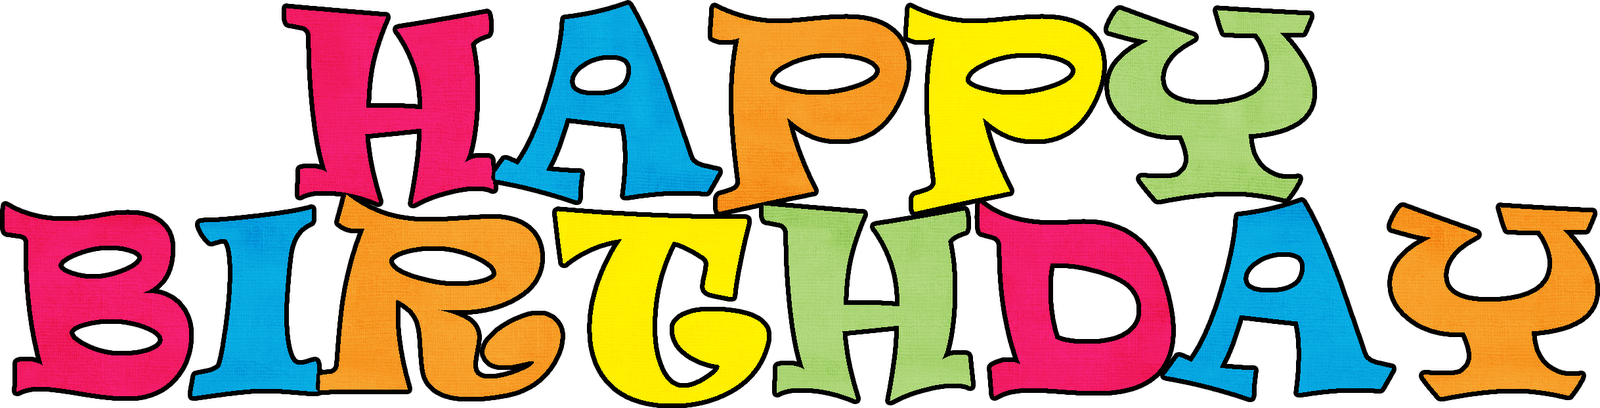 Free Happy Birthday Clip Download Free Happy Birthday Clip Png Images